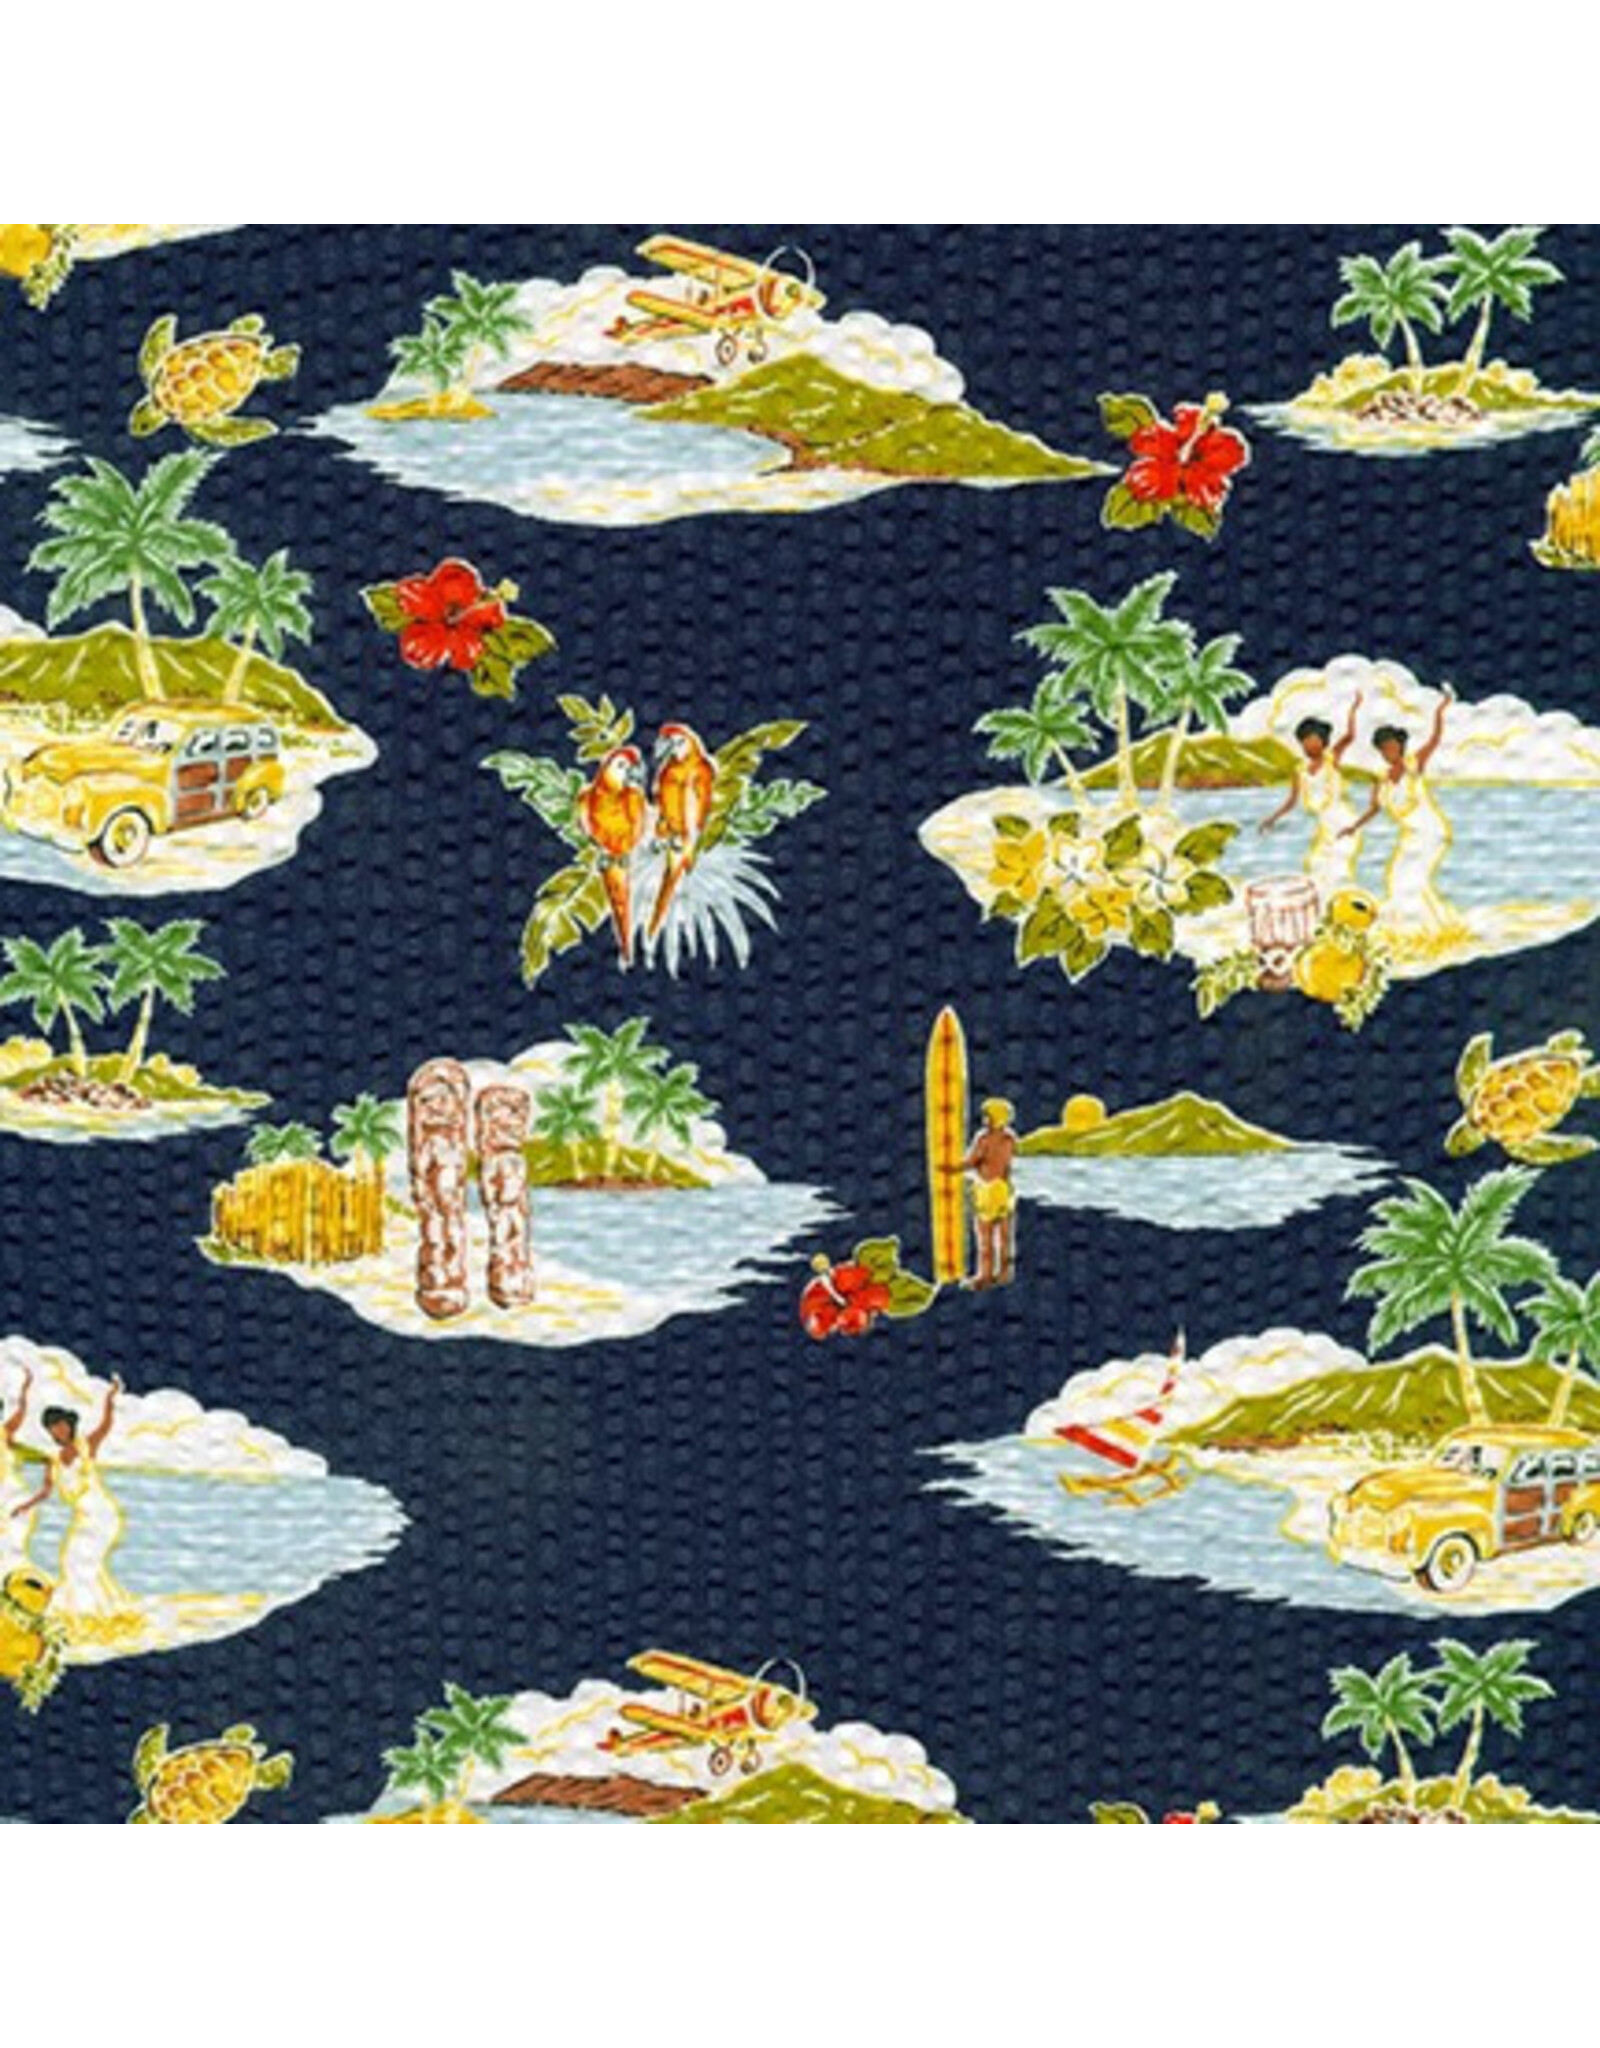 Sevenberry Plissé Collection, Tropical in Navy, Fabric Half-Yards